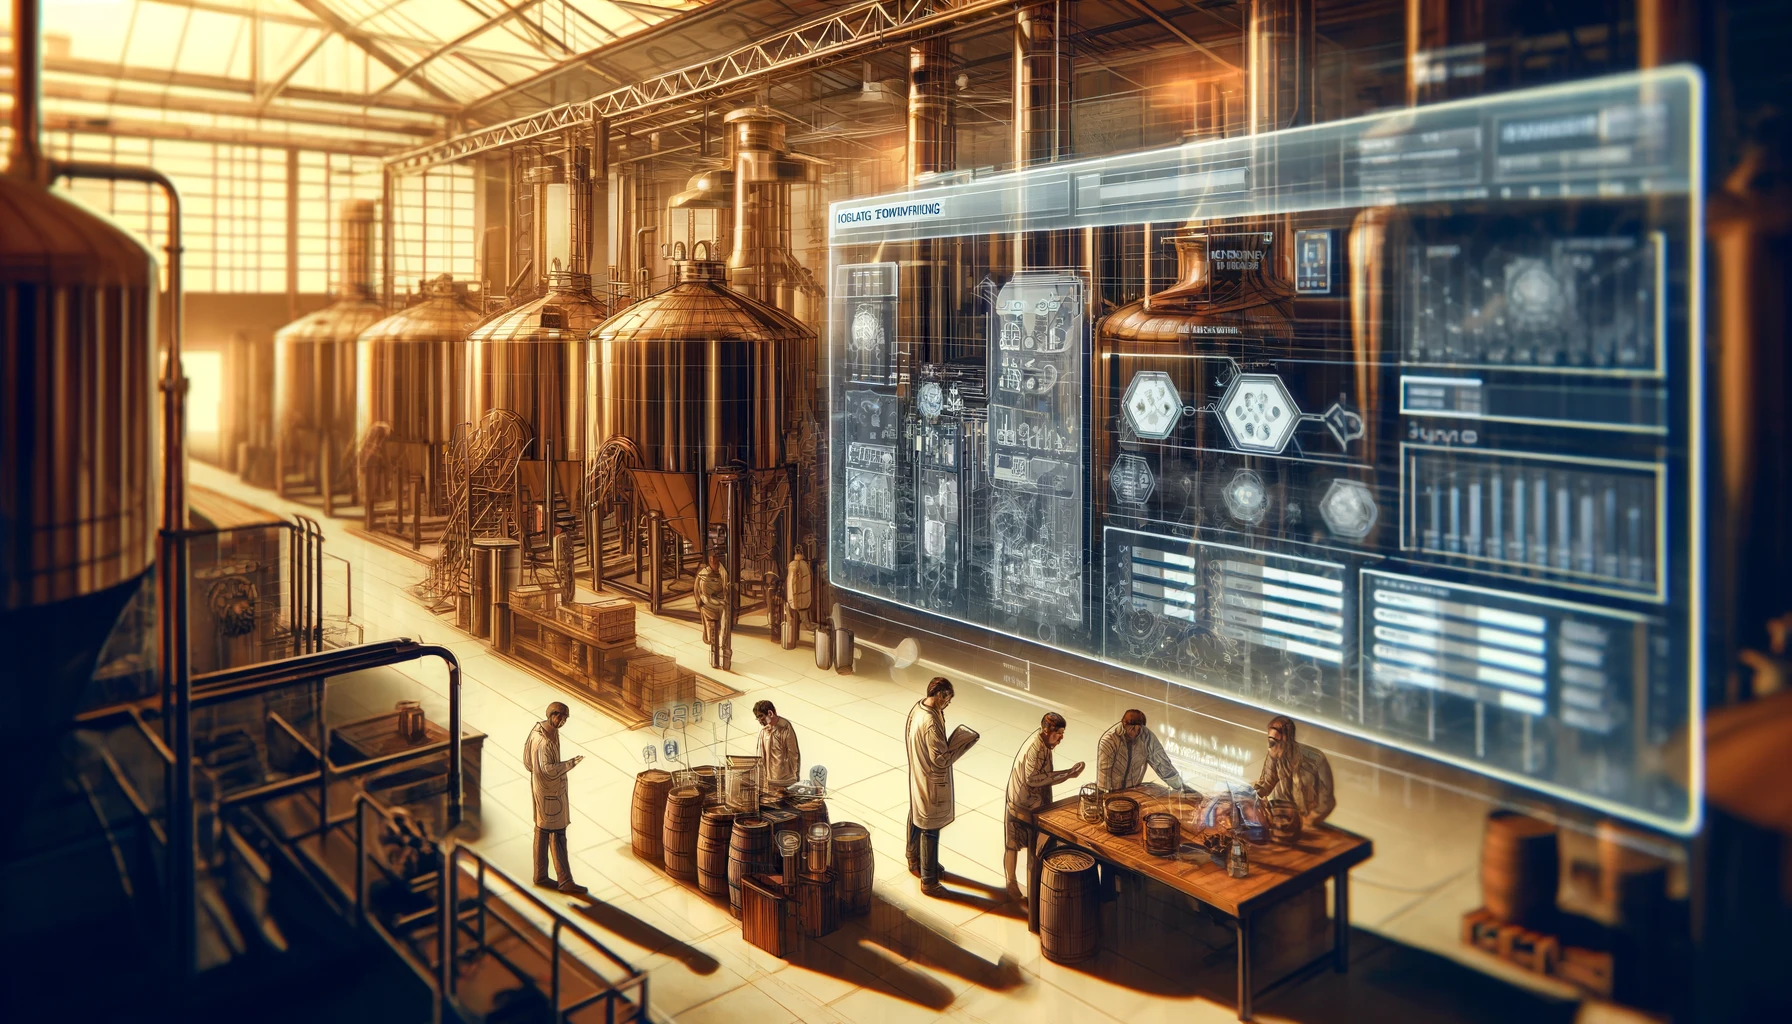 Here's the illustration, focusing more closely on the brewers as they interact with the AI system within the brewery. The close-up view captures the intensity and focus of the brewers as they engage with the advanced technology, with a background softly blurred to enhance the foreground interactions.